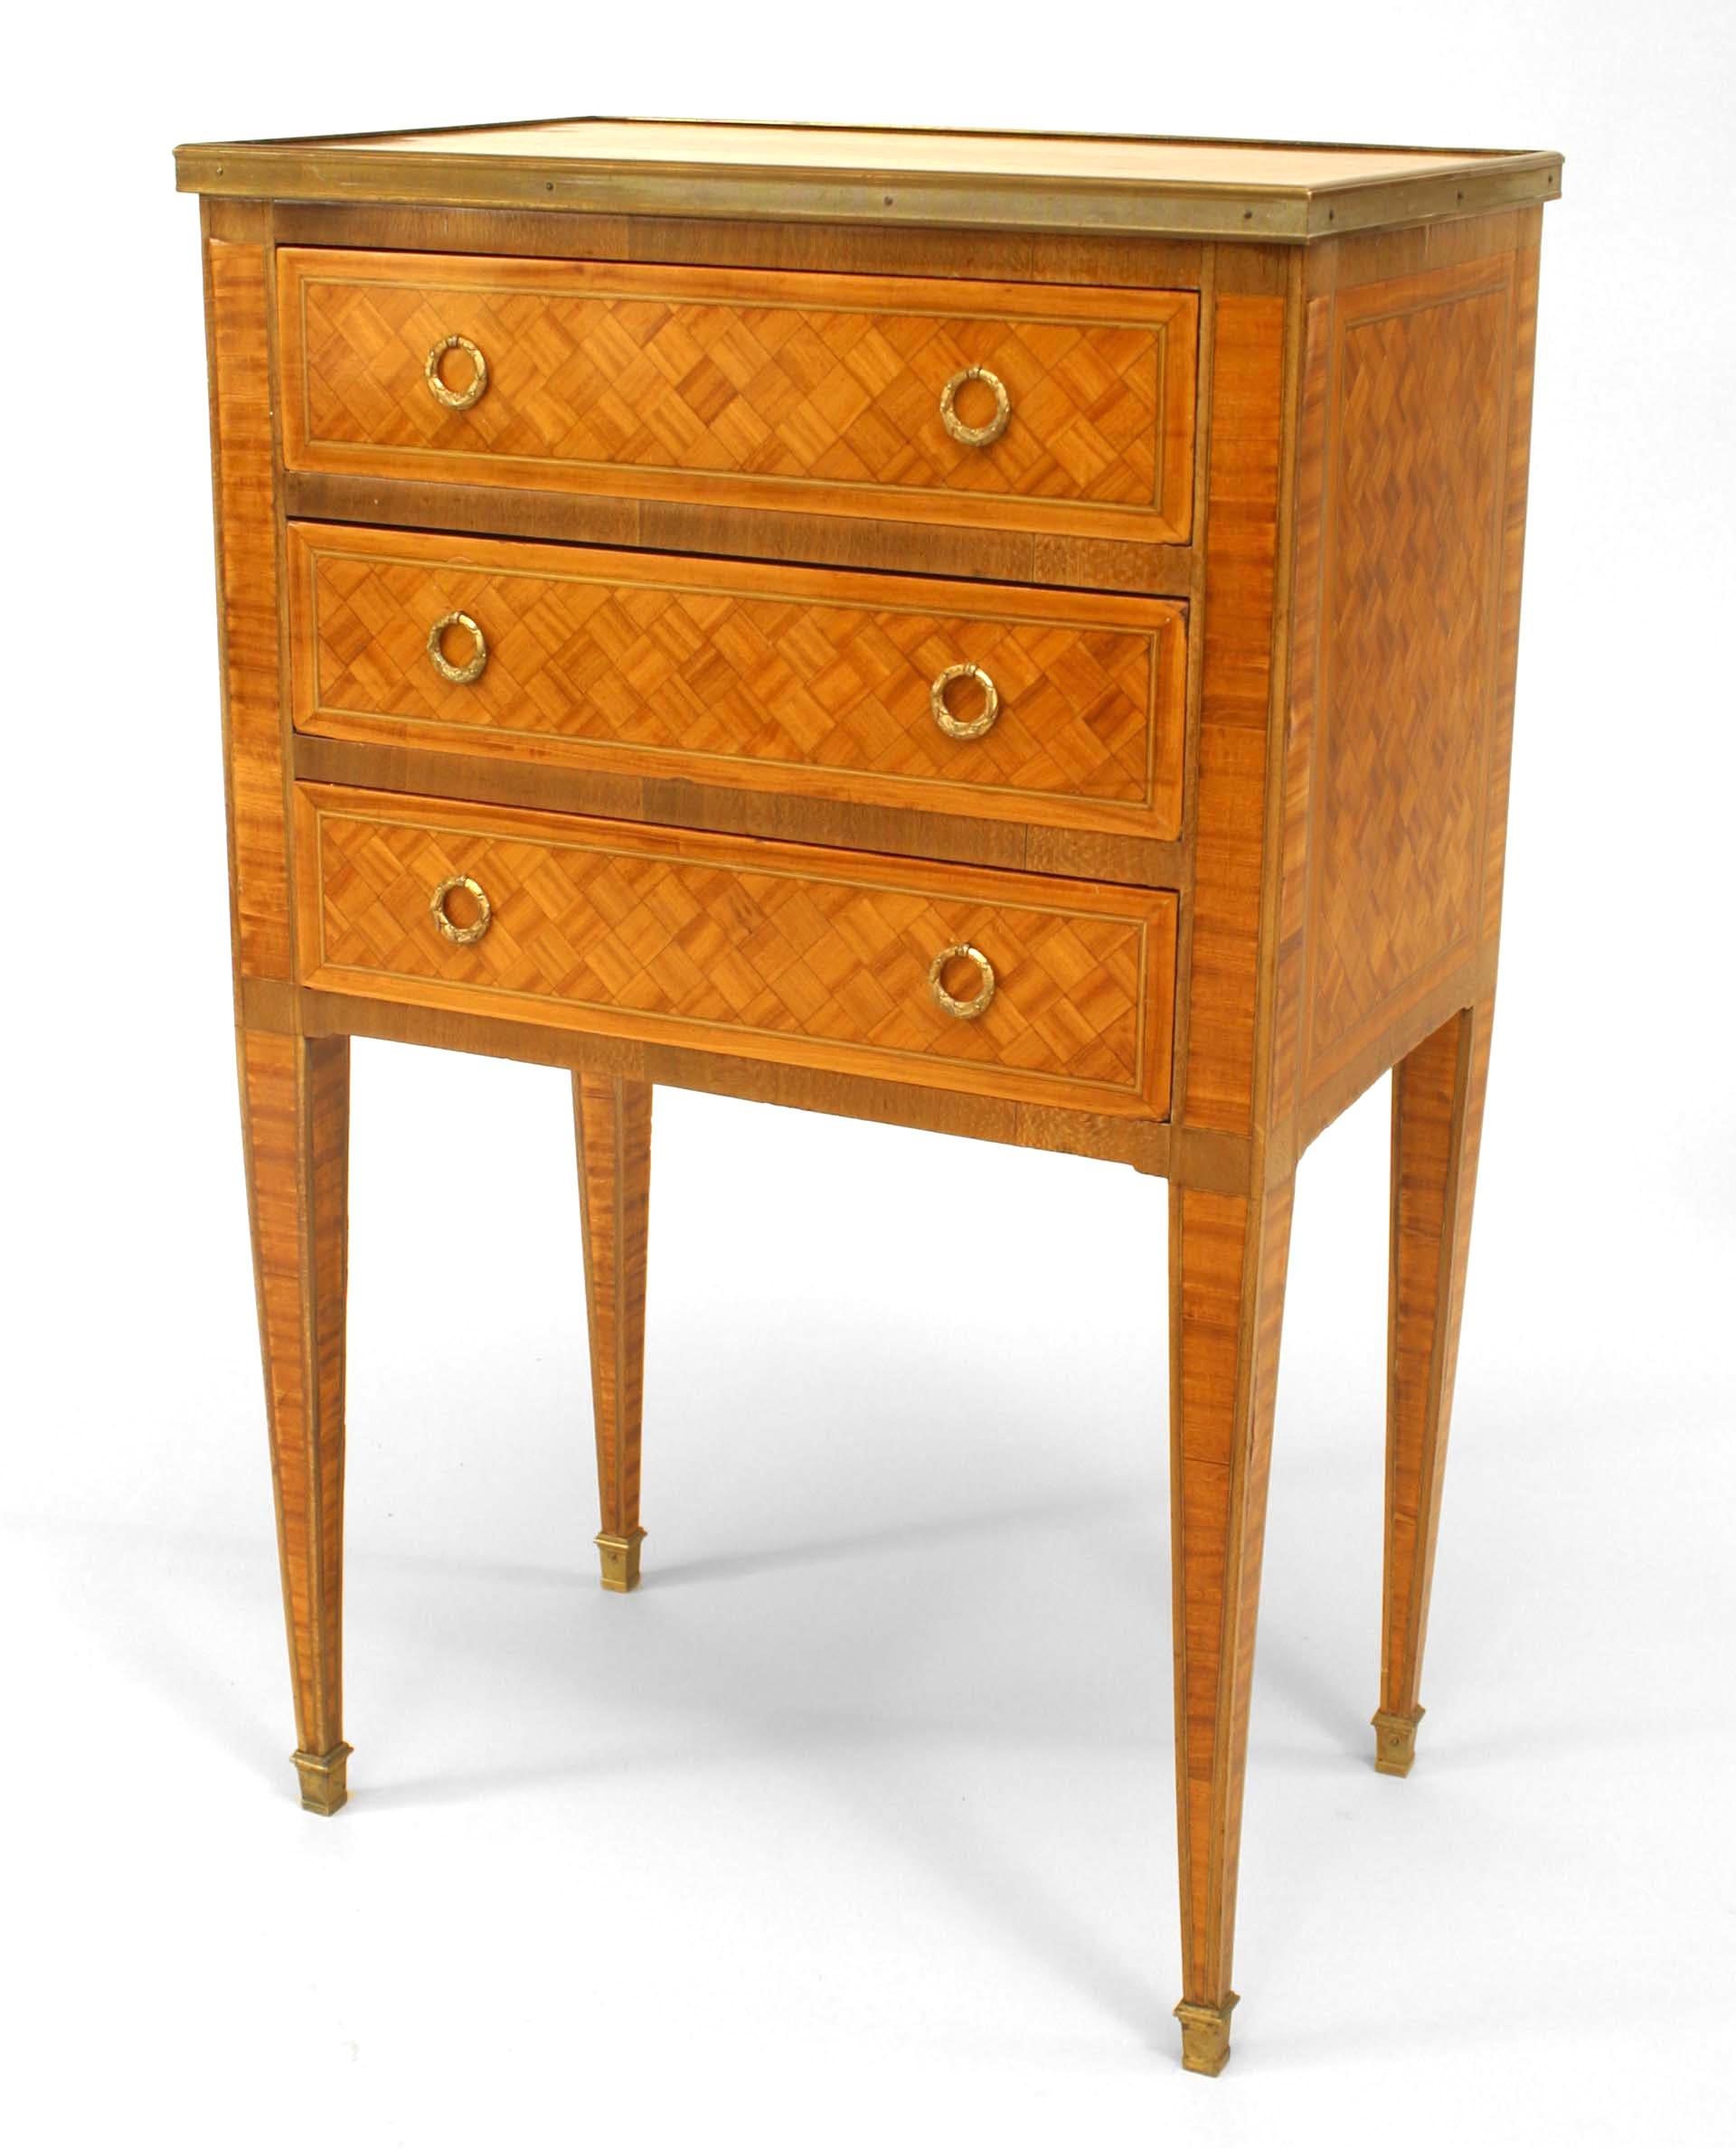 French Louis XVI-style (19th Century) satinwood and parquetry inlaid small commode with three drawers and gilt bronze trim.
